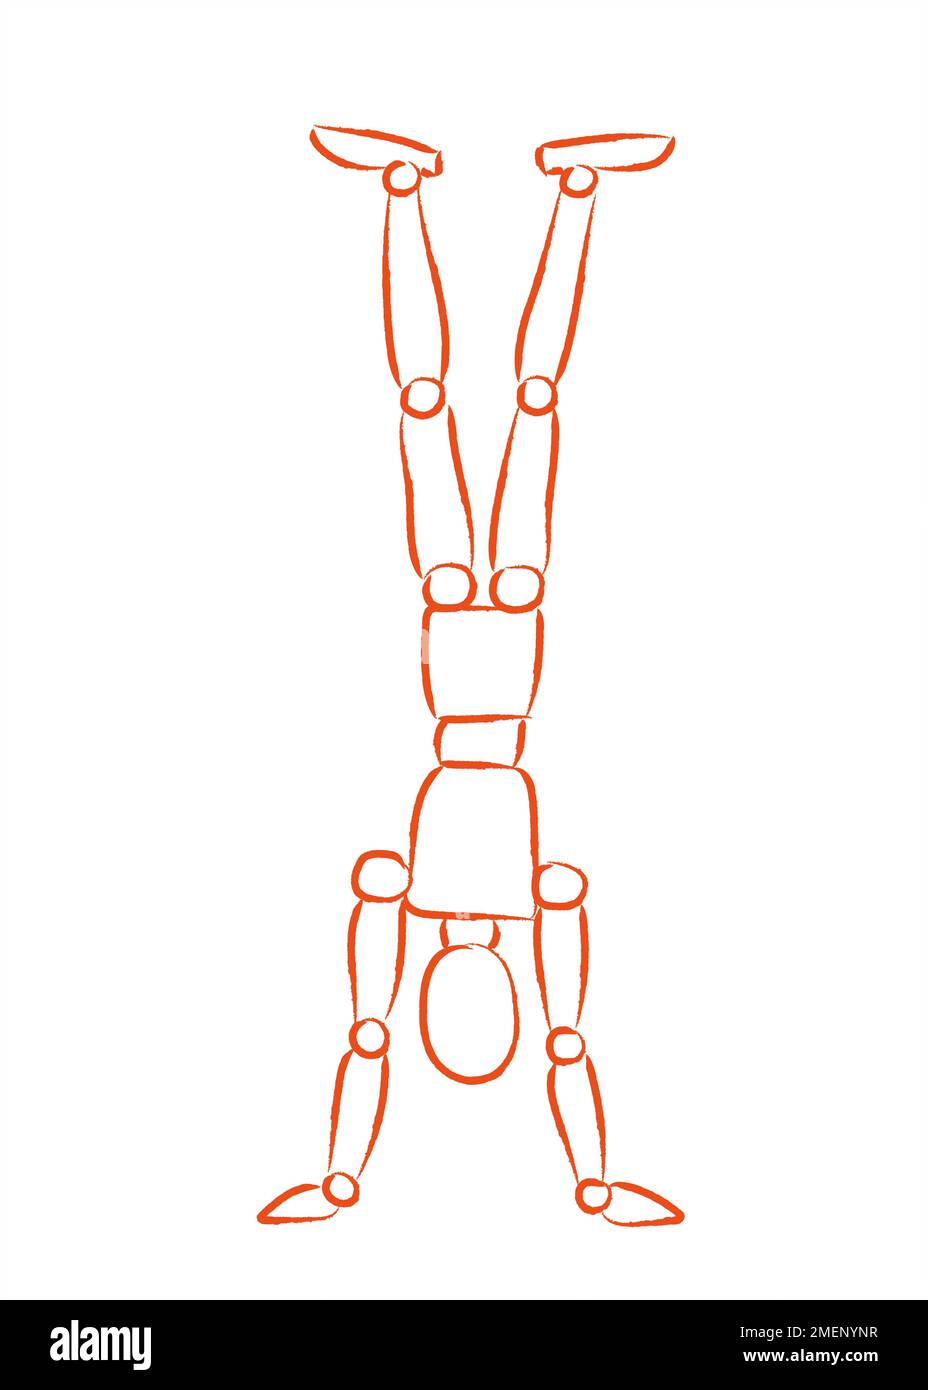 Outline of person in handstand pose Stock Photo